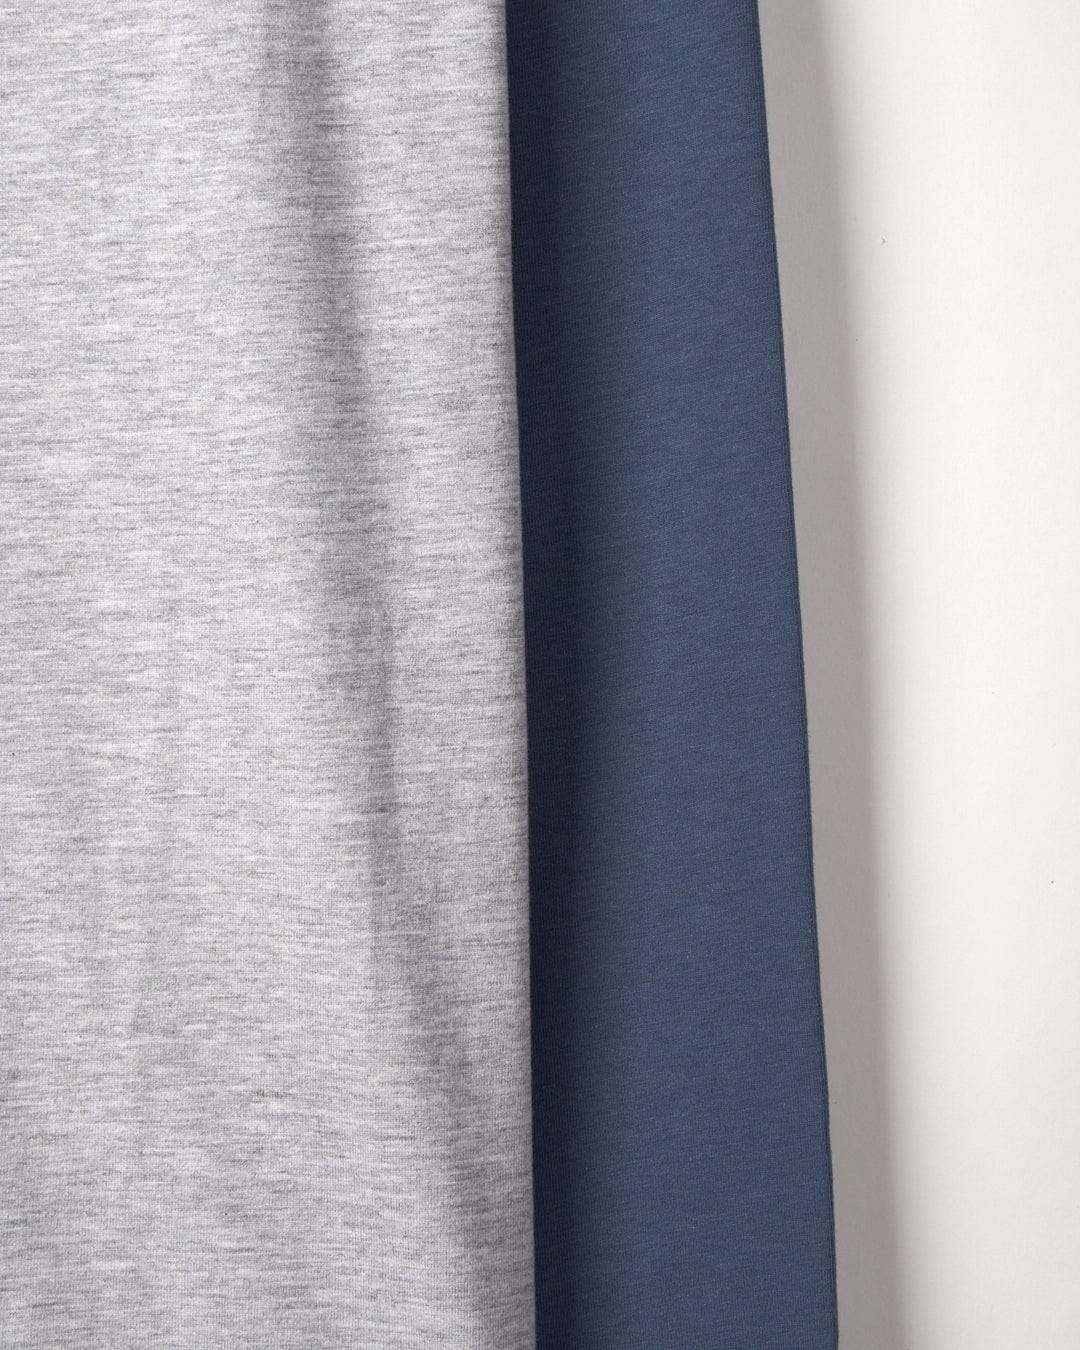 Close-up of two fabrics, one Strike Logo - Mens Long Sleeve Raglan T-Shirt - Grey Marl from Saltrock and textured, the other dark blue and smooth, laid side by side on a flat surface.